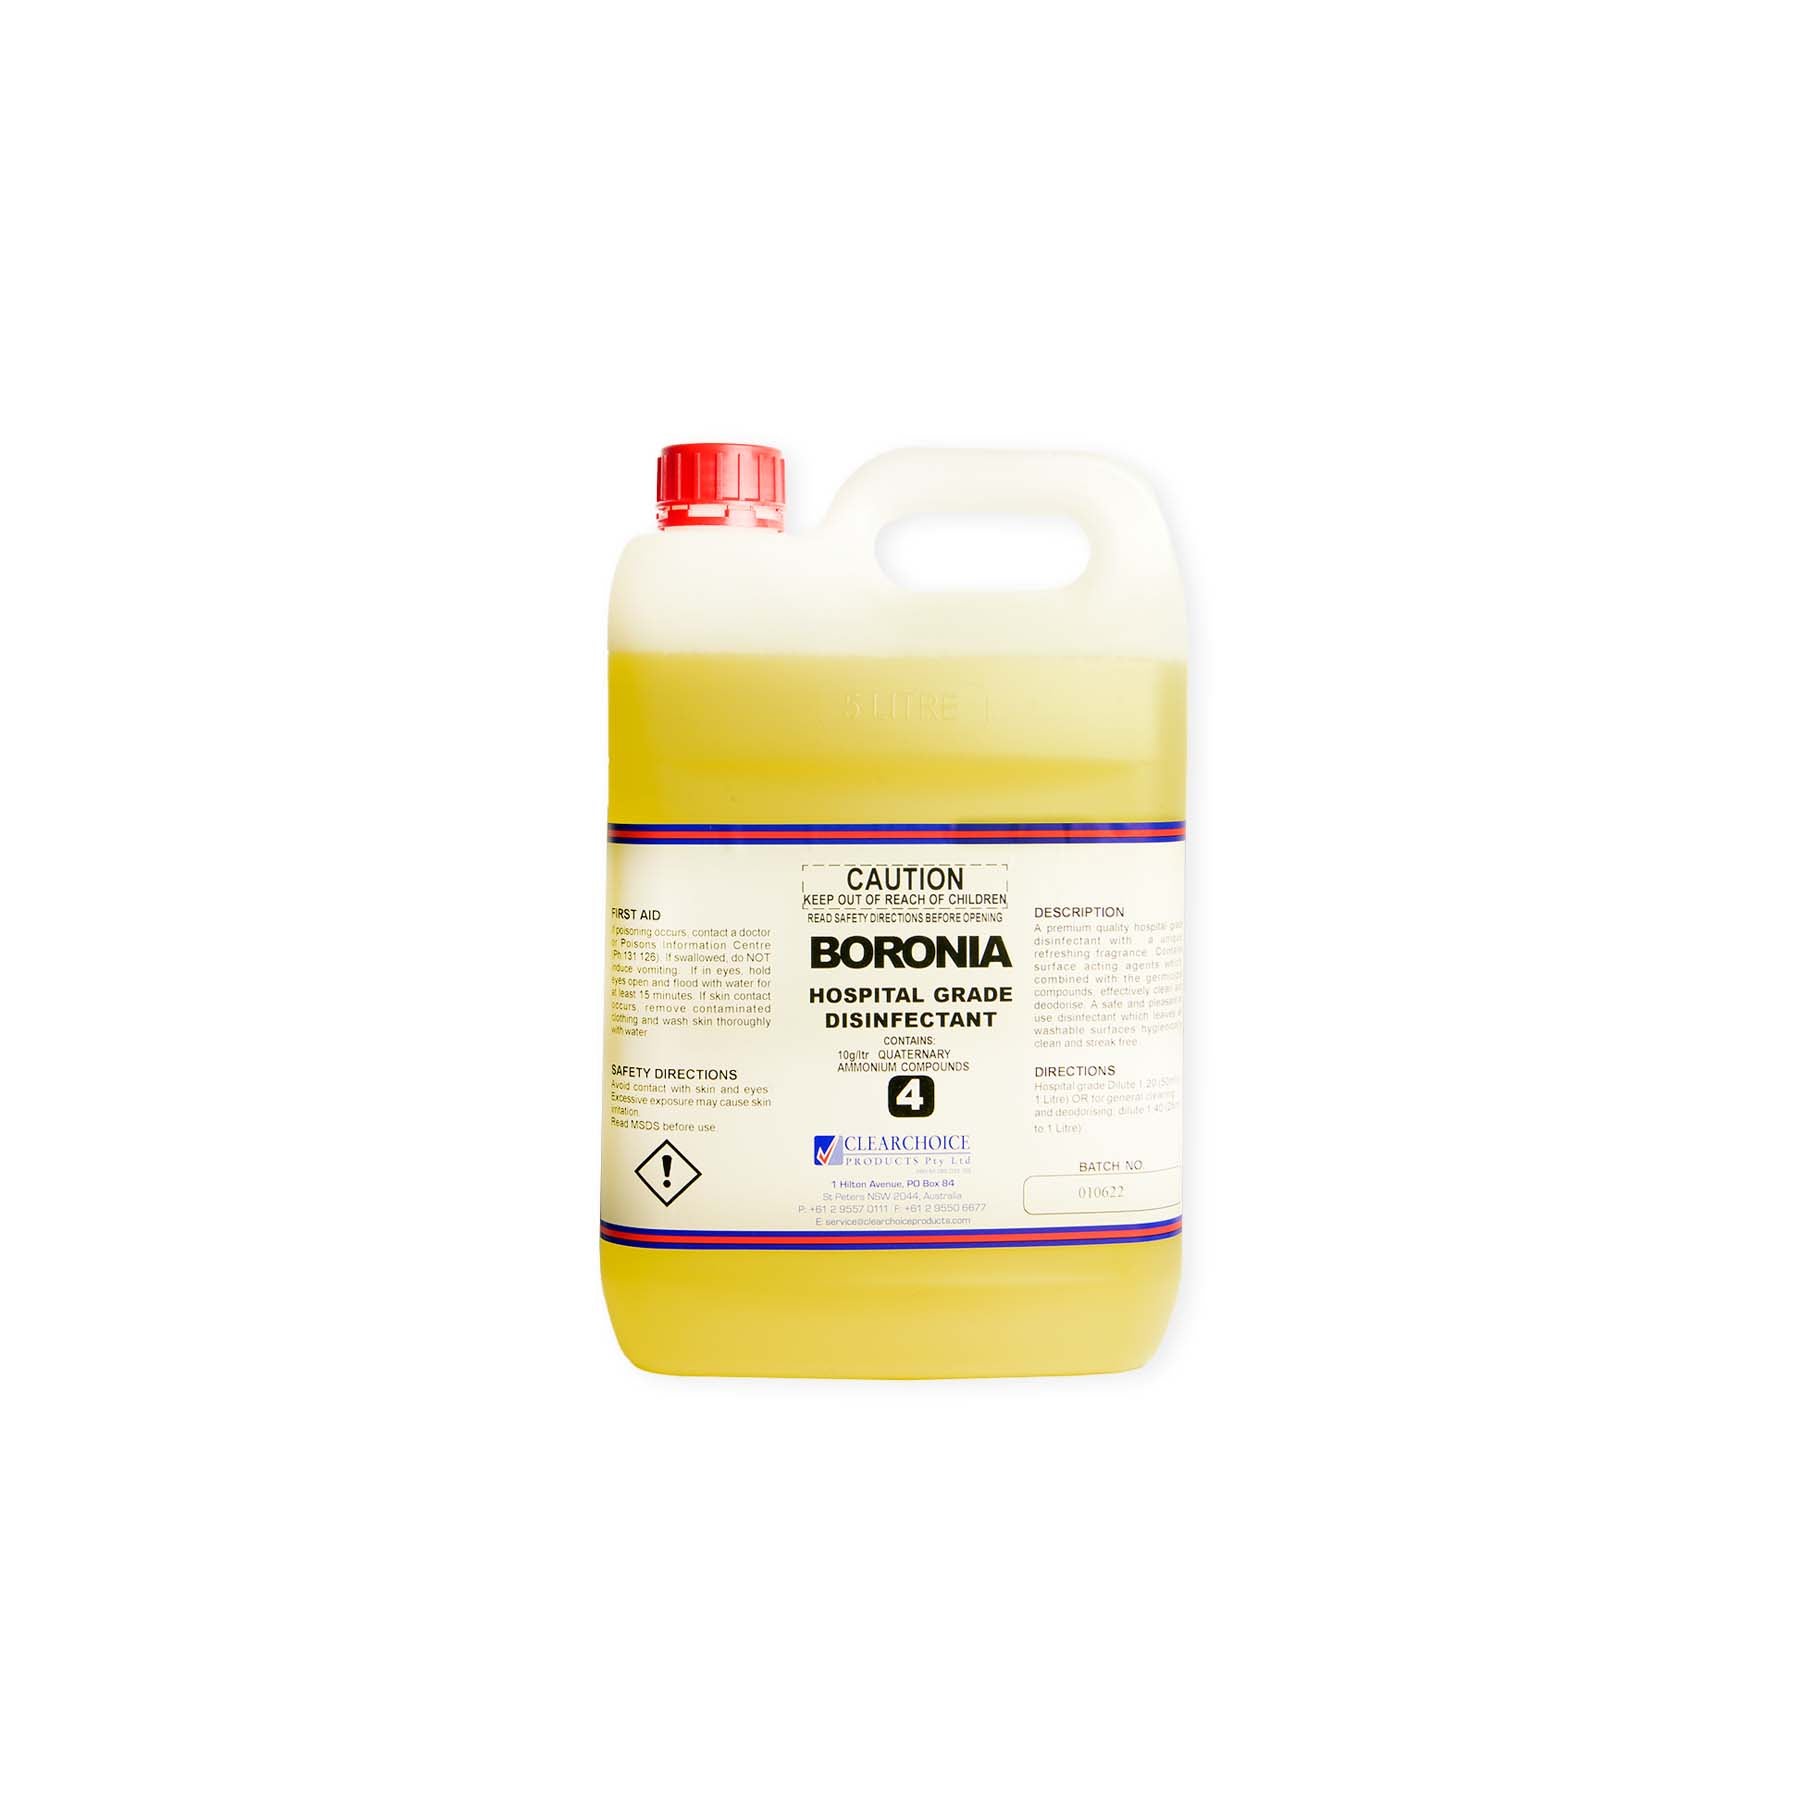 CLEARCHOICE BORONIA DISINFECTANT HOSPITAL GRADE 5L